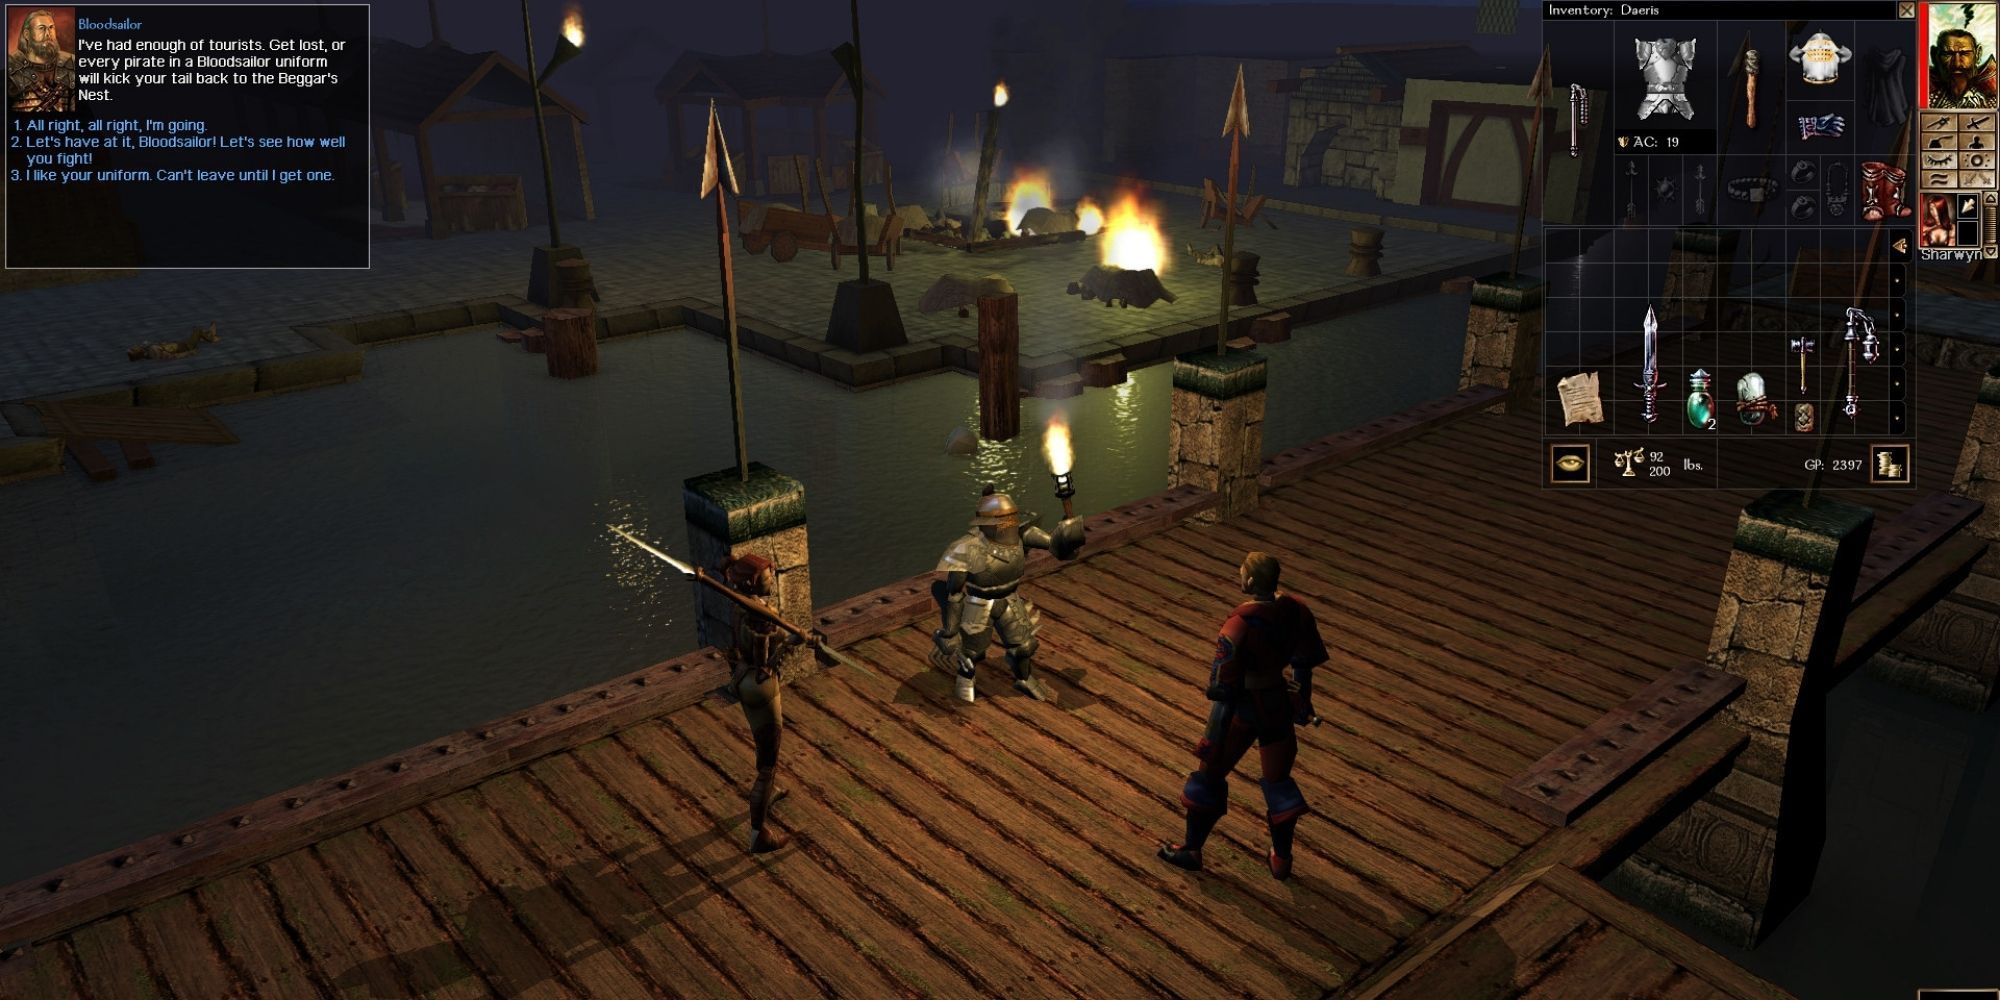 A player talking to an NPC in Neverwinter Nights